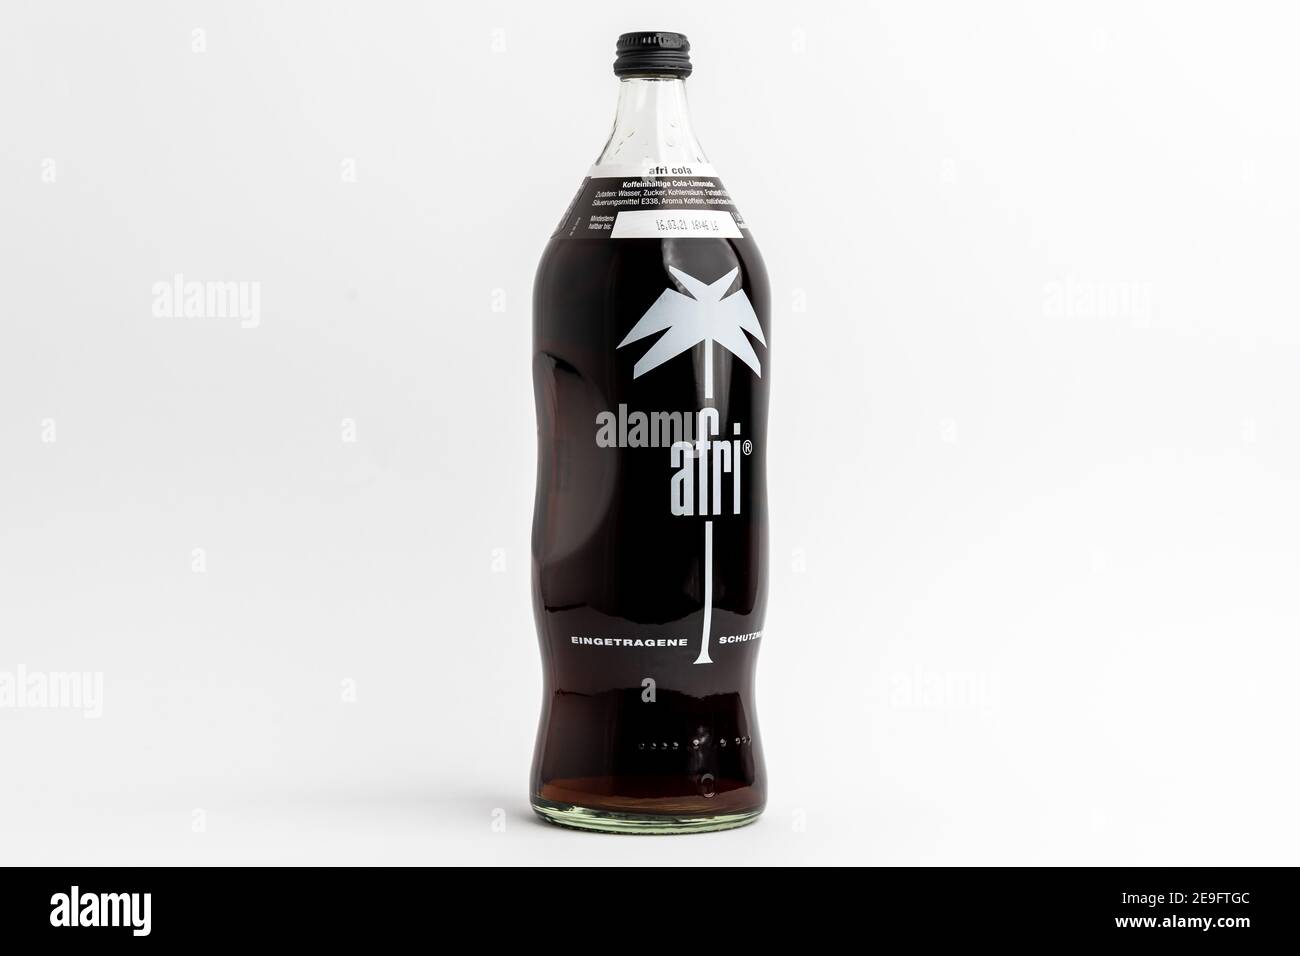 https://c8.alamy.com/comp/2E9FTGC/1-liter-afri-cola-glass-bottle-in-front-of-white-background-refreshing-soft-drink-beverage-made-in-germany-the-iconic-design-in-a-big-size-2E9FTGC.jpg